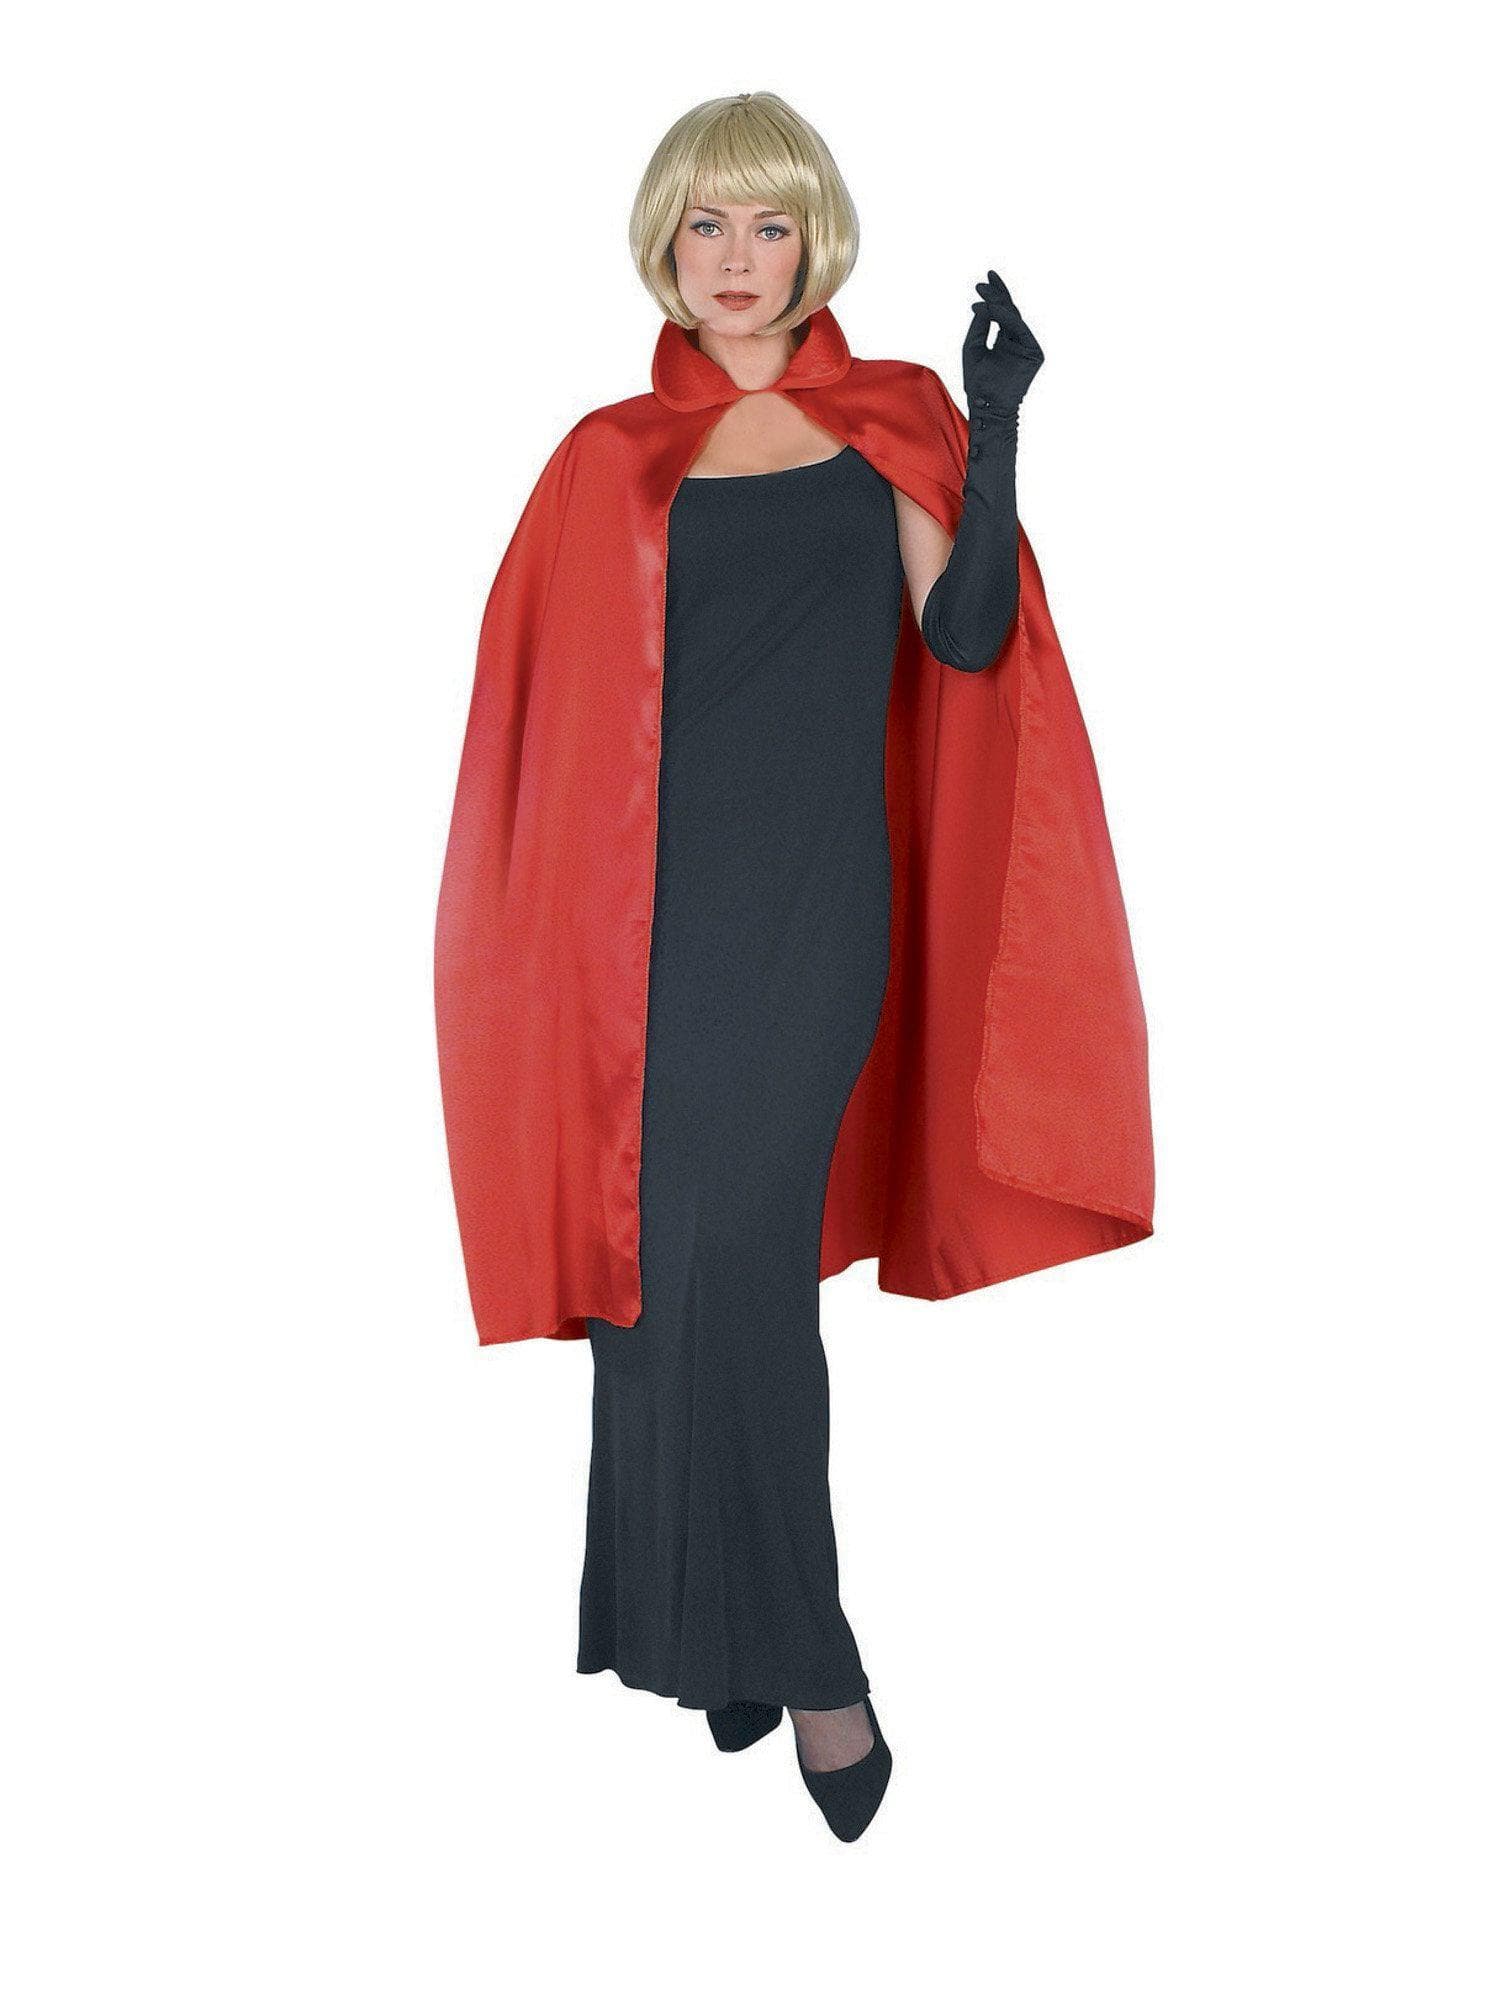 Adult Red Satin Collared Cape - costumes.com